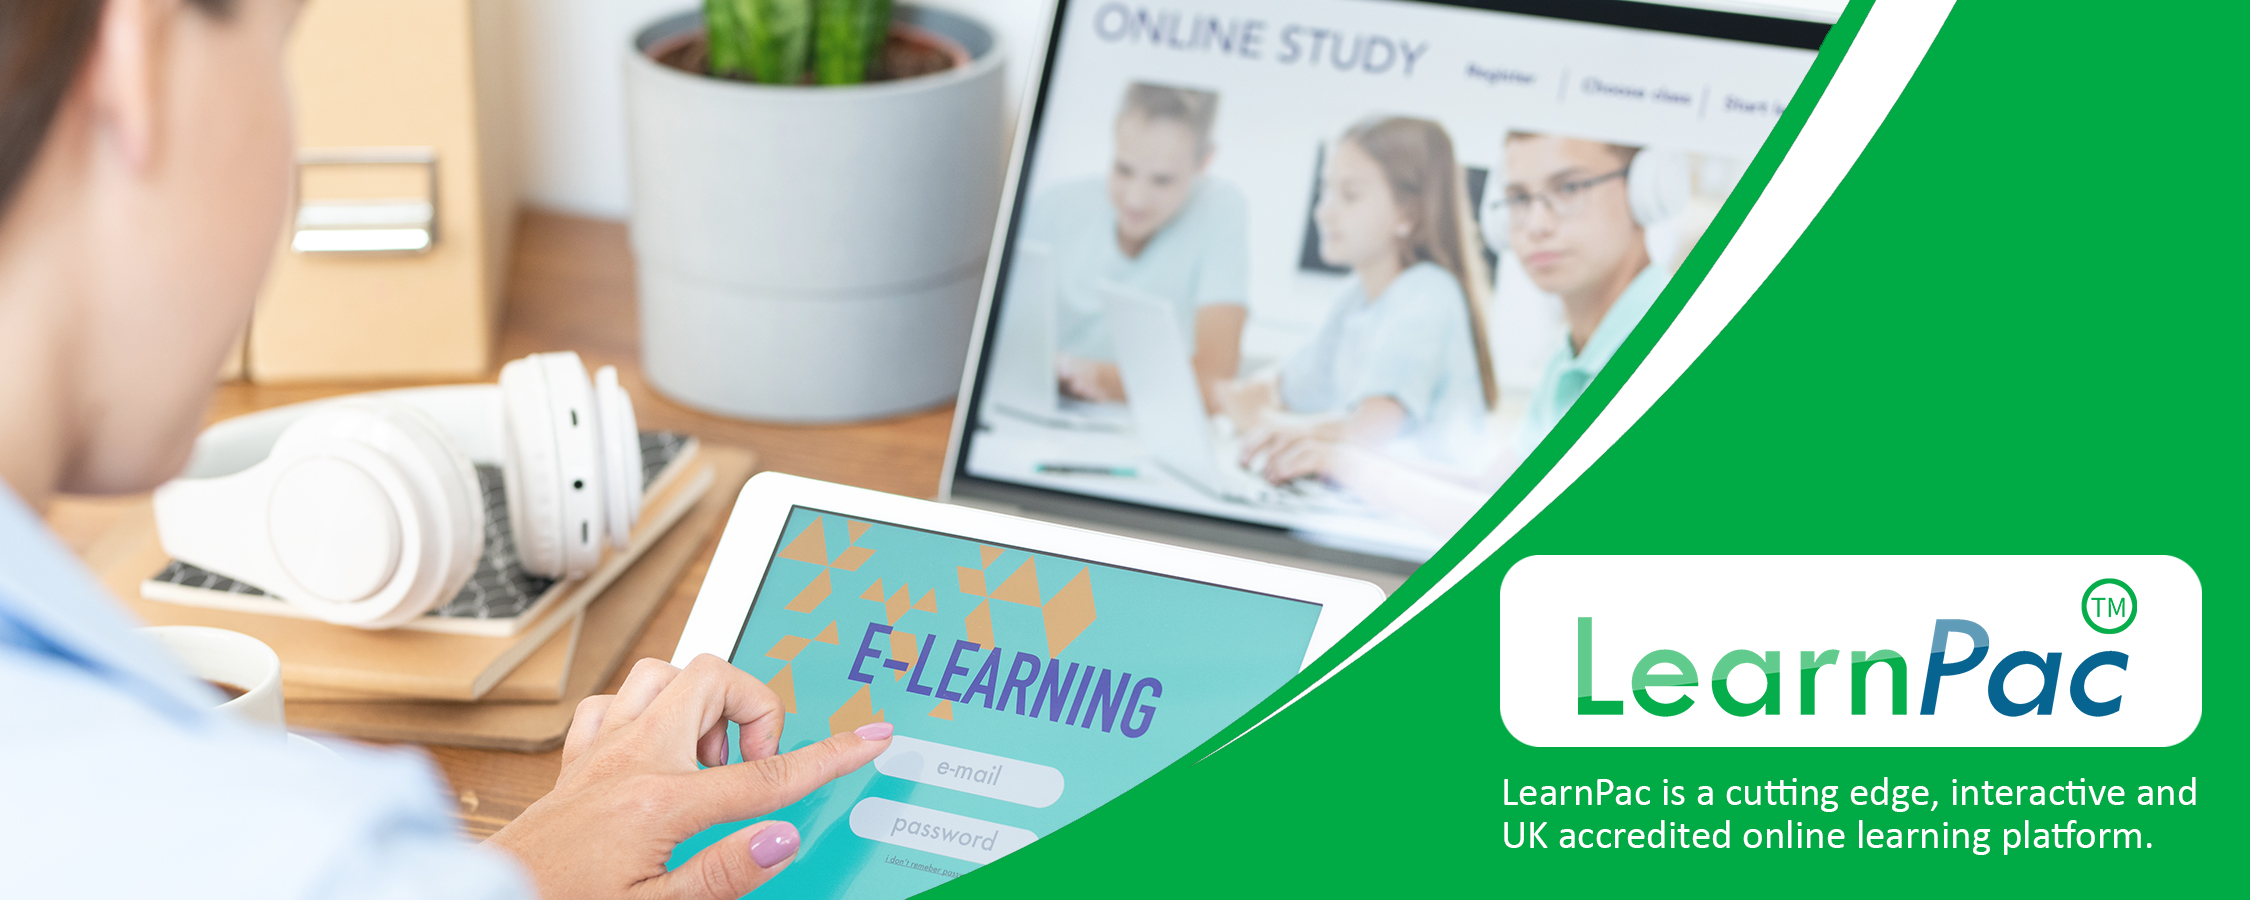 Baby Training for 18 Months to 2 Years Old - eLearning Courses - LearnPac Systems UK -